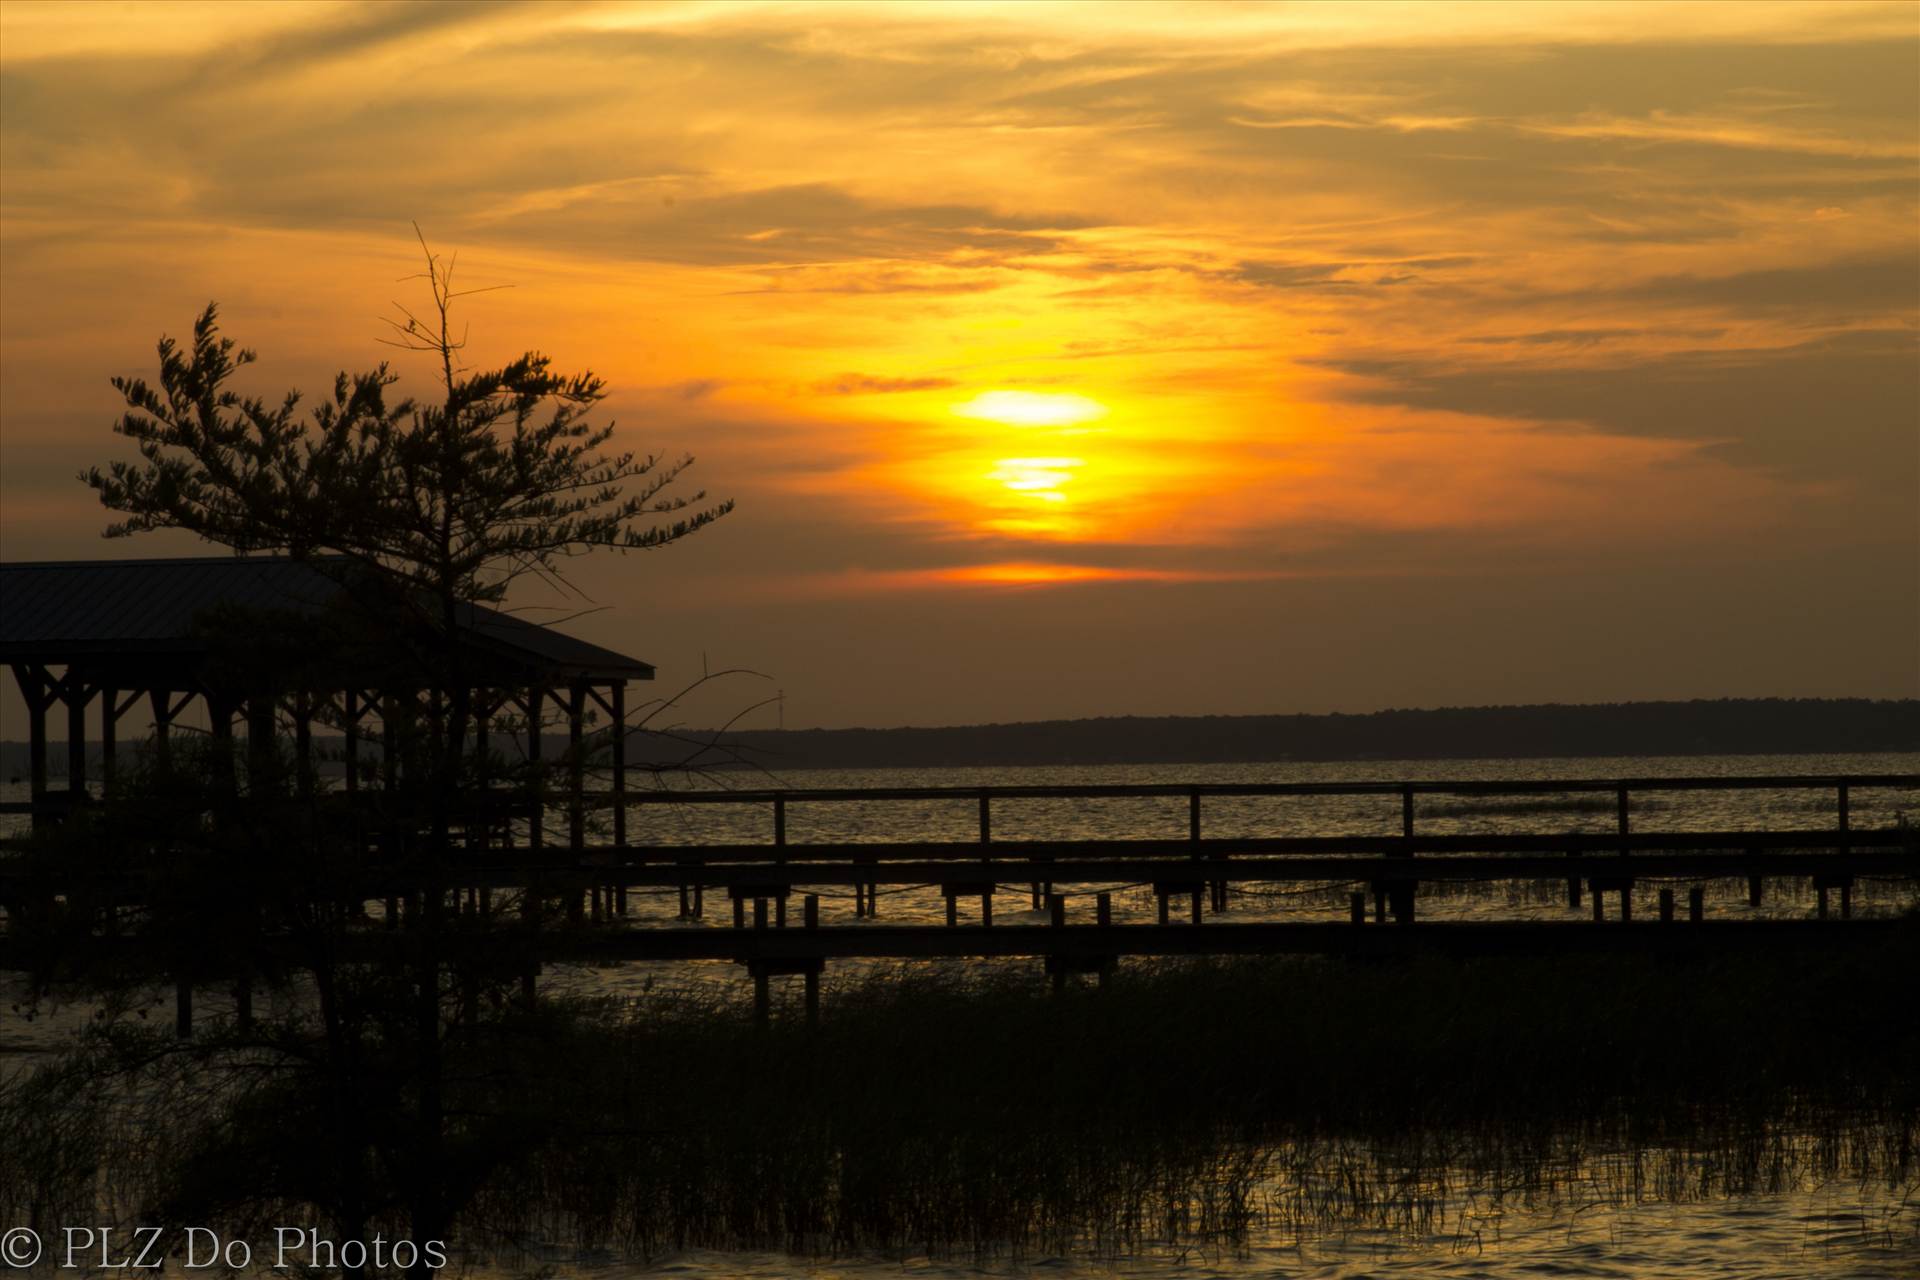 GOLDEN LAKE WACCAMAW The golden hour - sunset at Lake Waccamaw, NC by Patricia Zyzyk